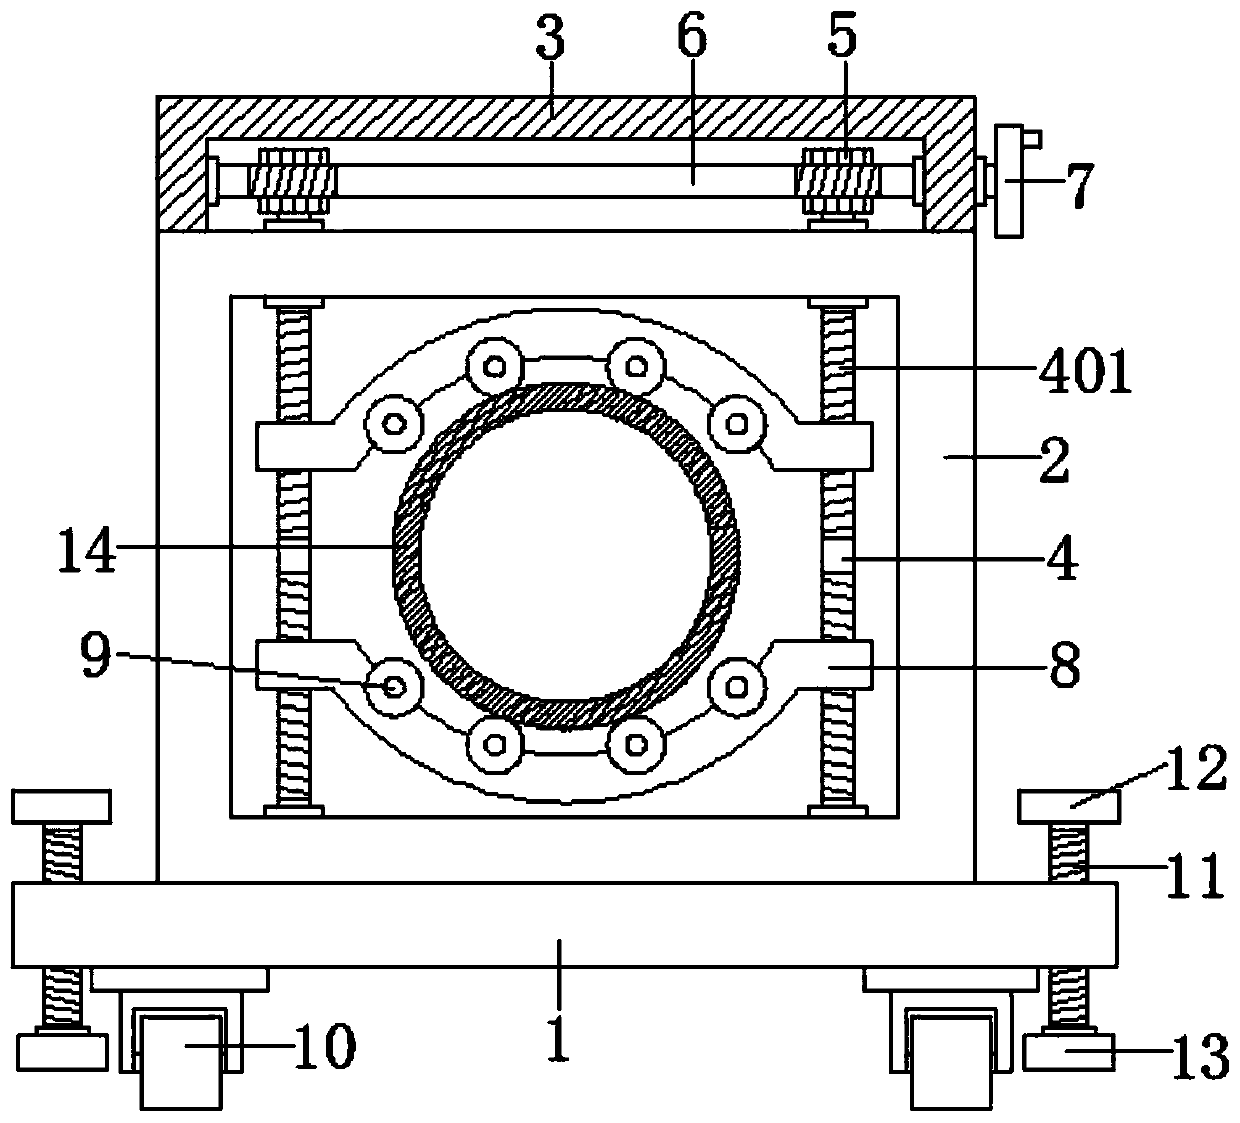 Supporting and fixing device for welding of pipe fittings